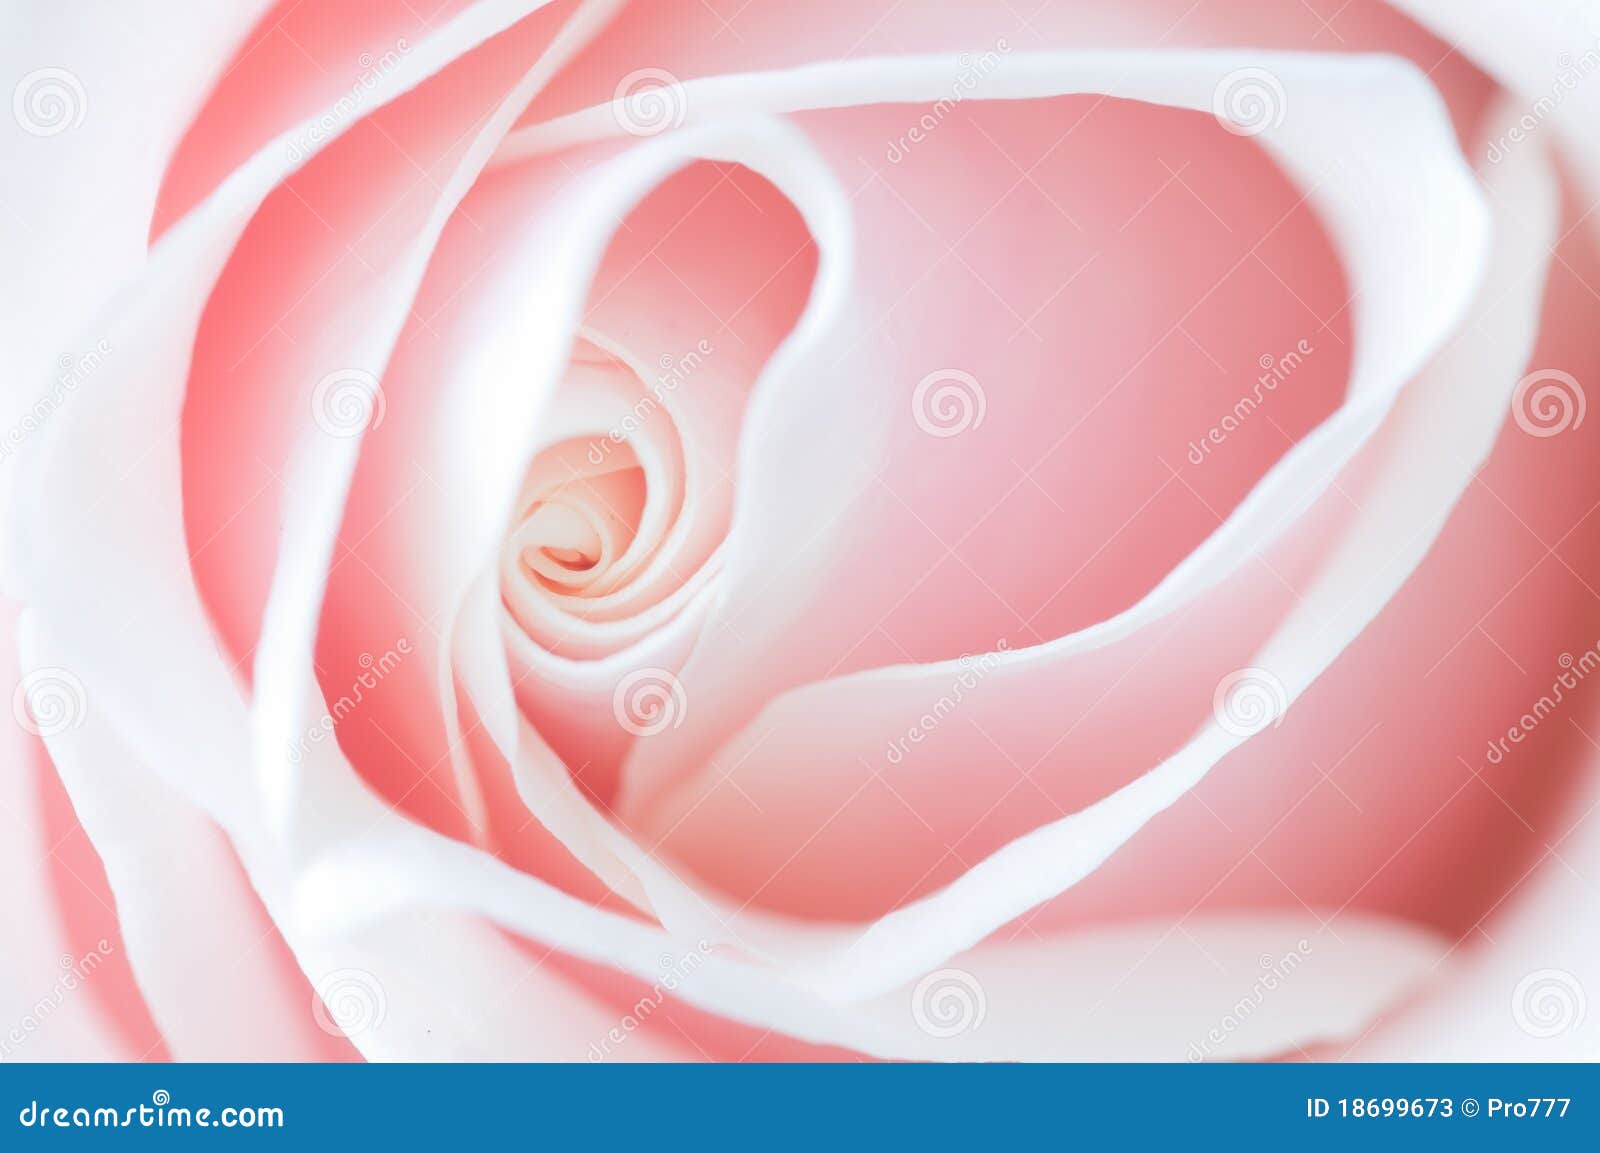 delicate pink rose